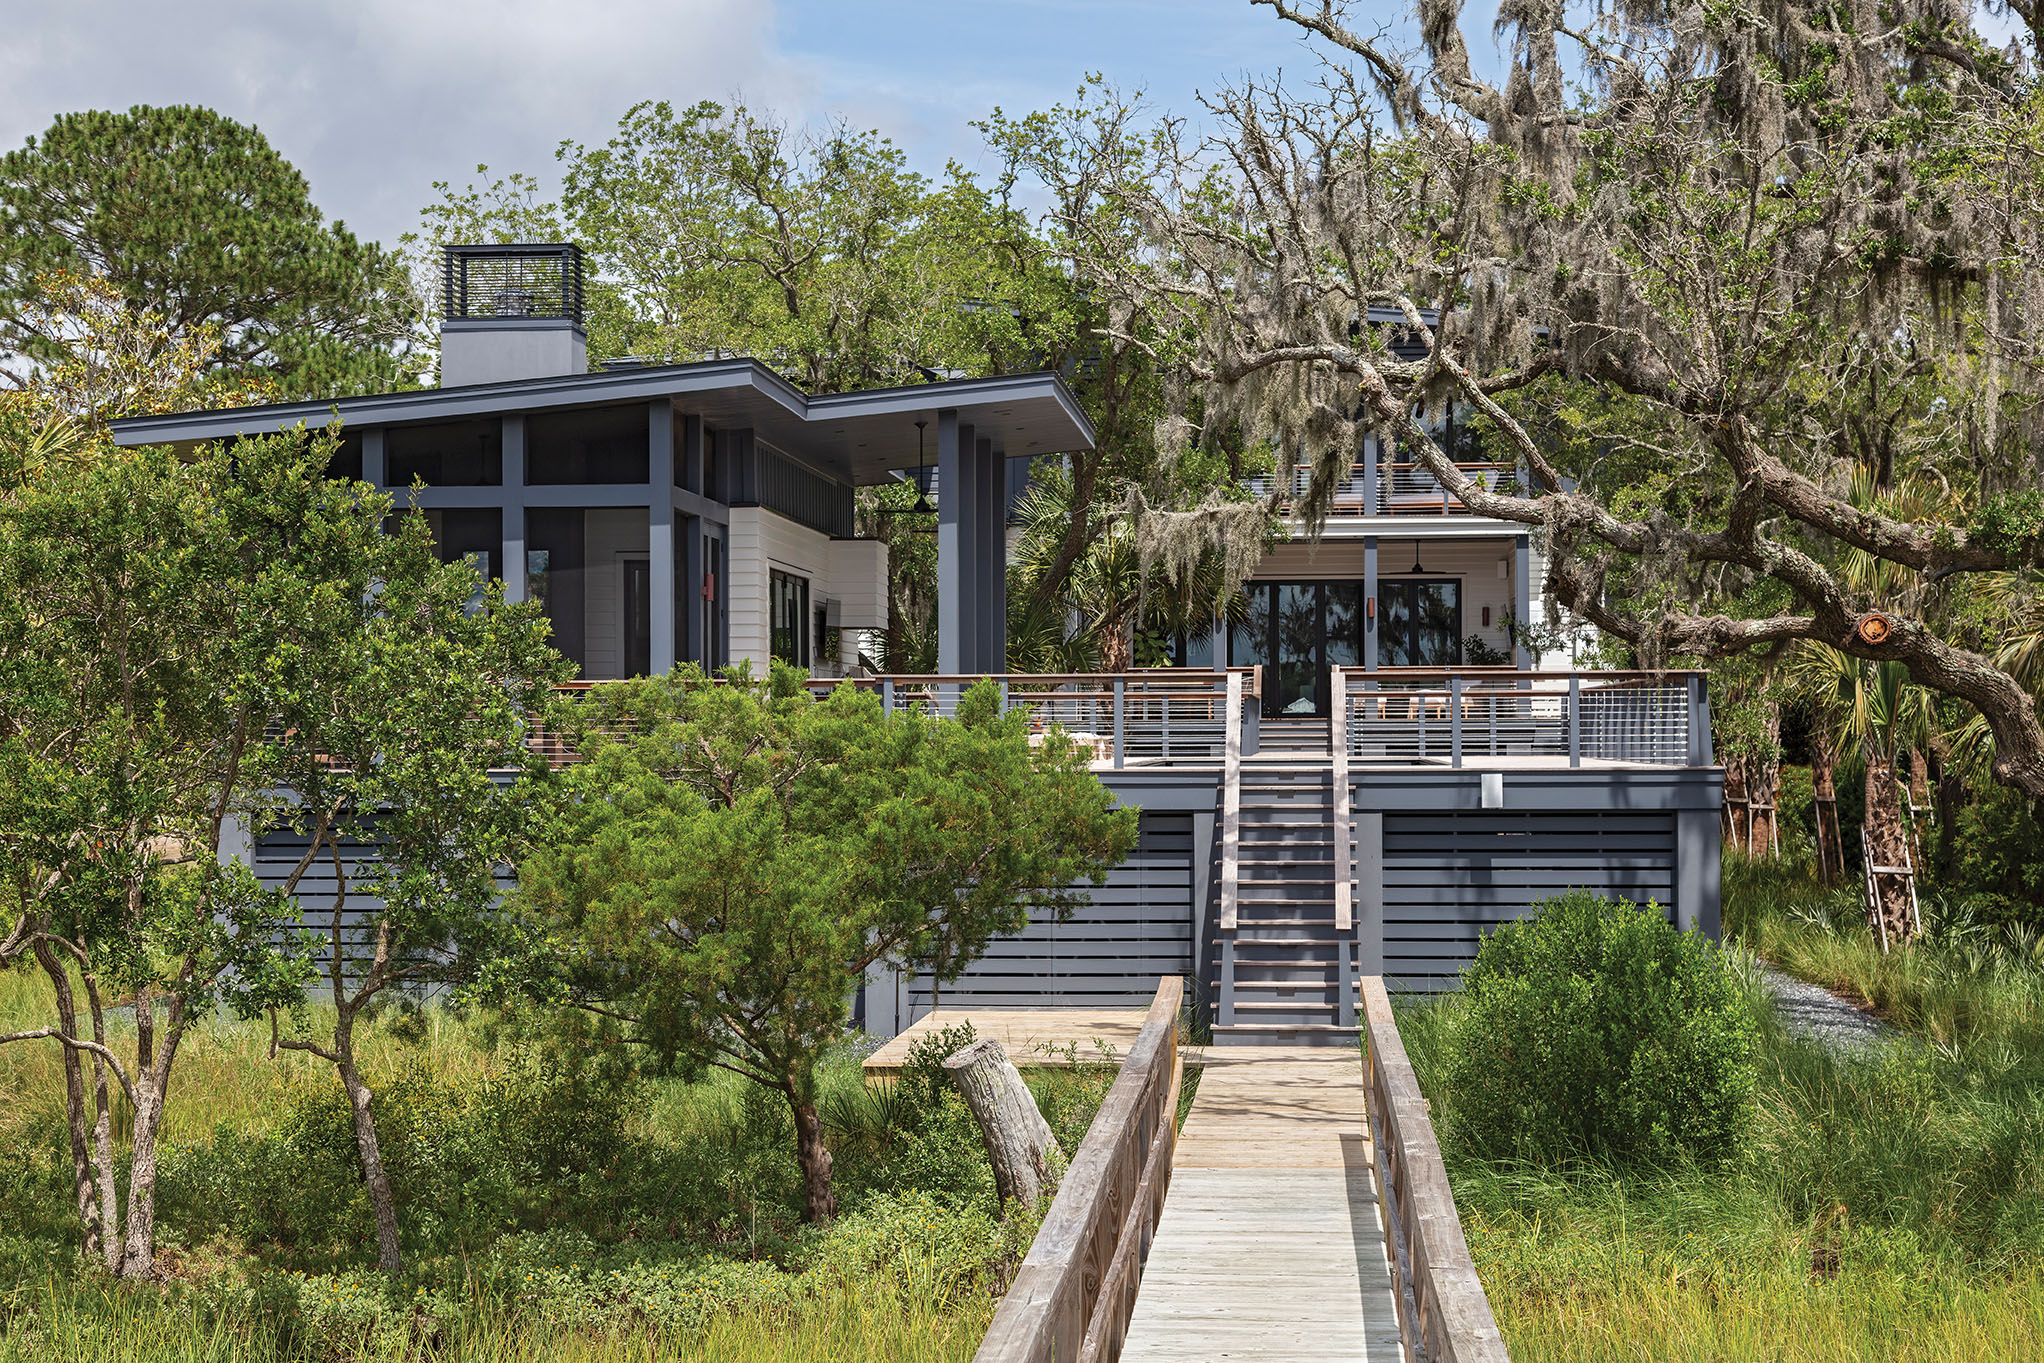 Natural fit: David and Sonya Dunn swapped life on a sailboat for an idyllic lot on James Island. Architecture firm Rush Dixon designed a modern coastal residence that embraces the river views and puts outdoor living front and center, courtesy of a spacious pool house, plenty of porches, and deck space.